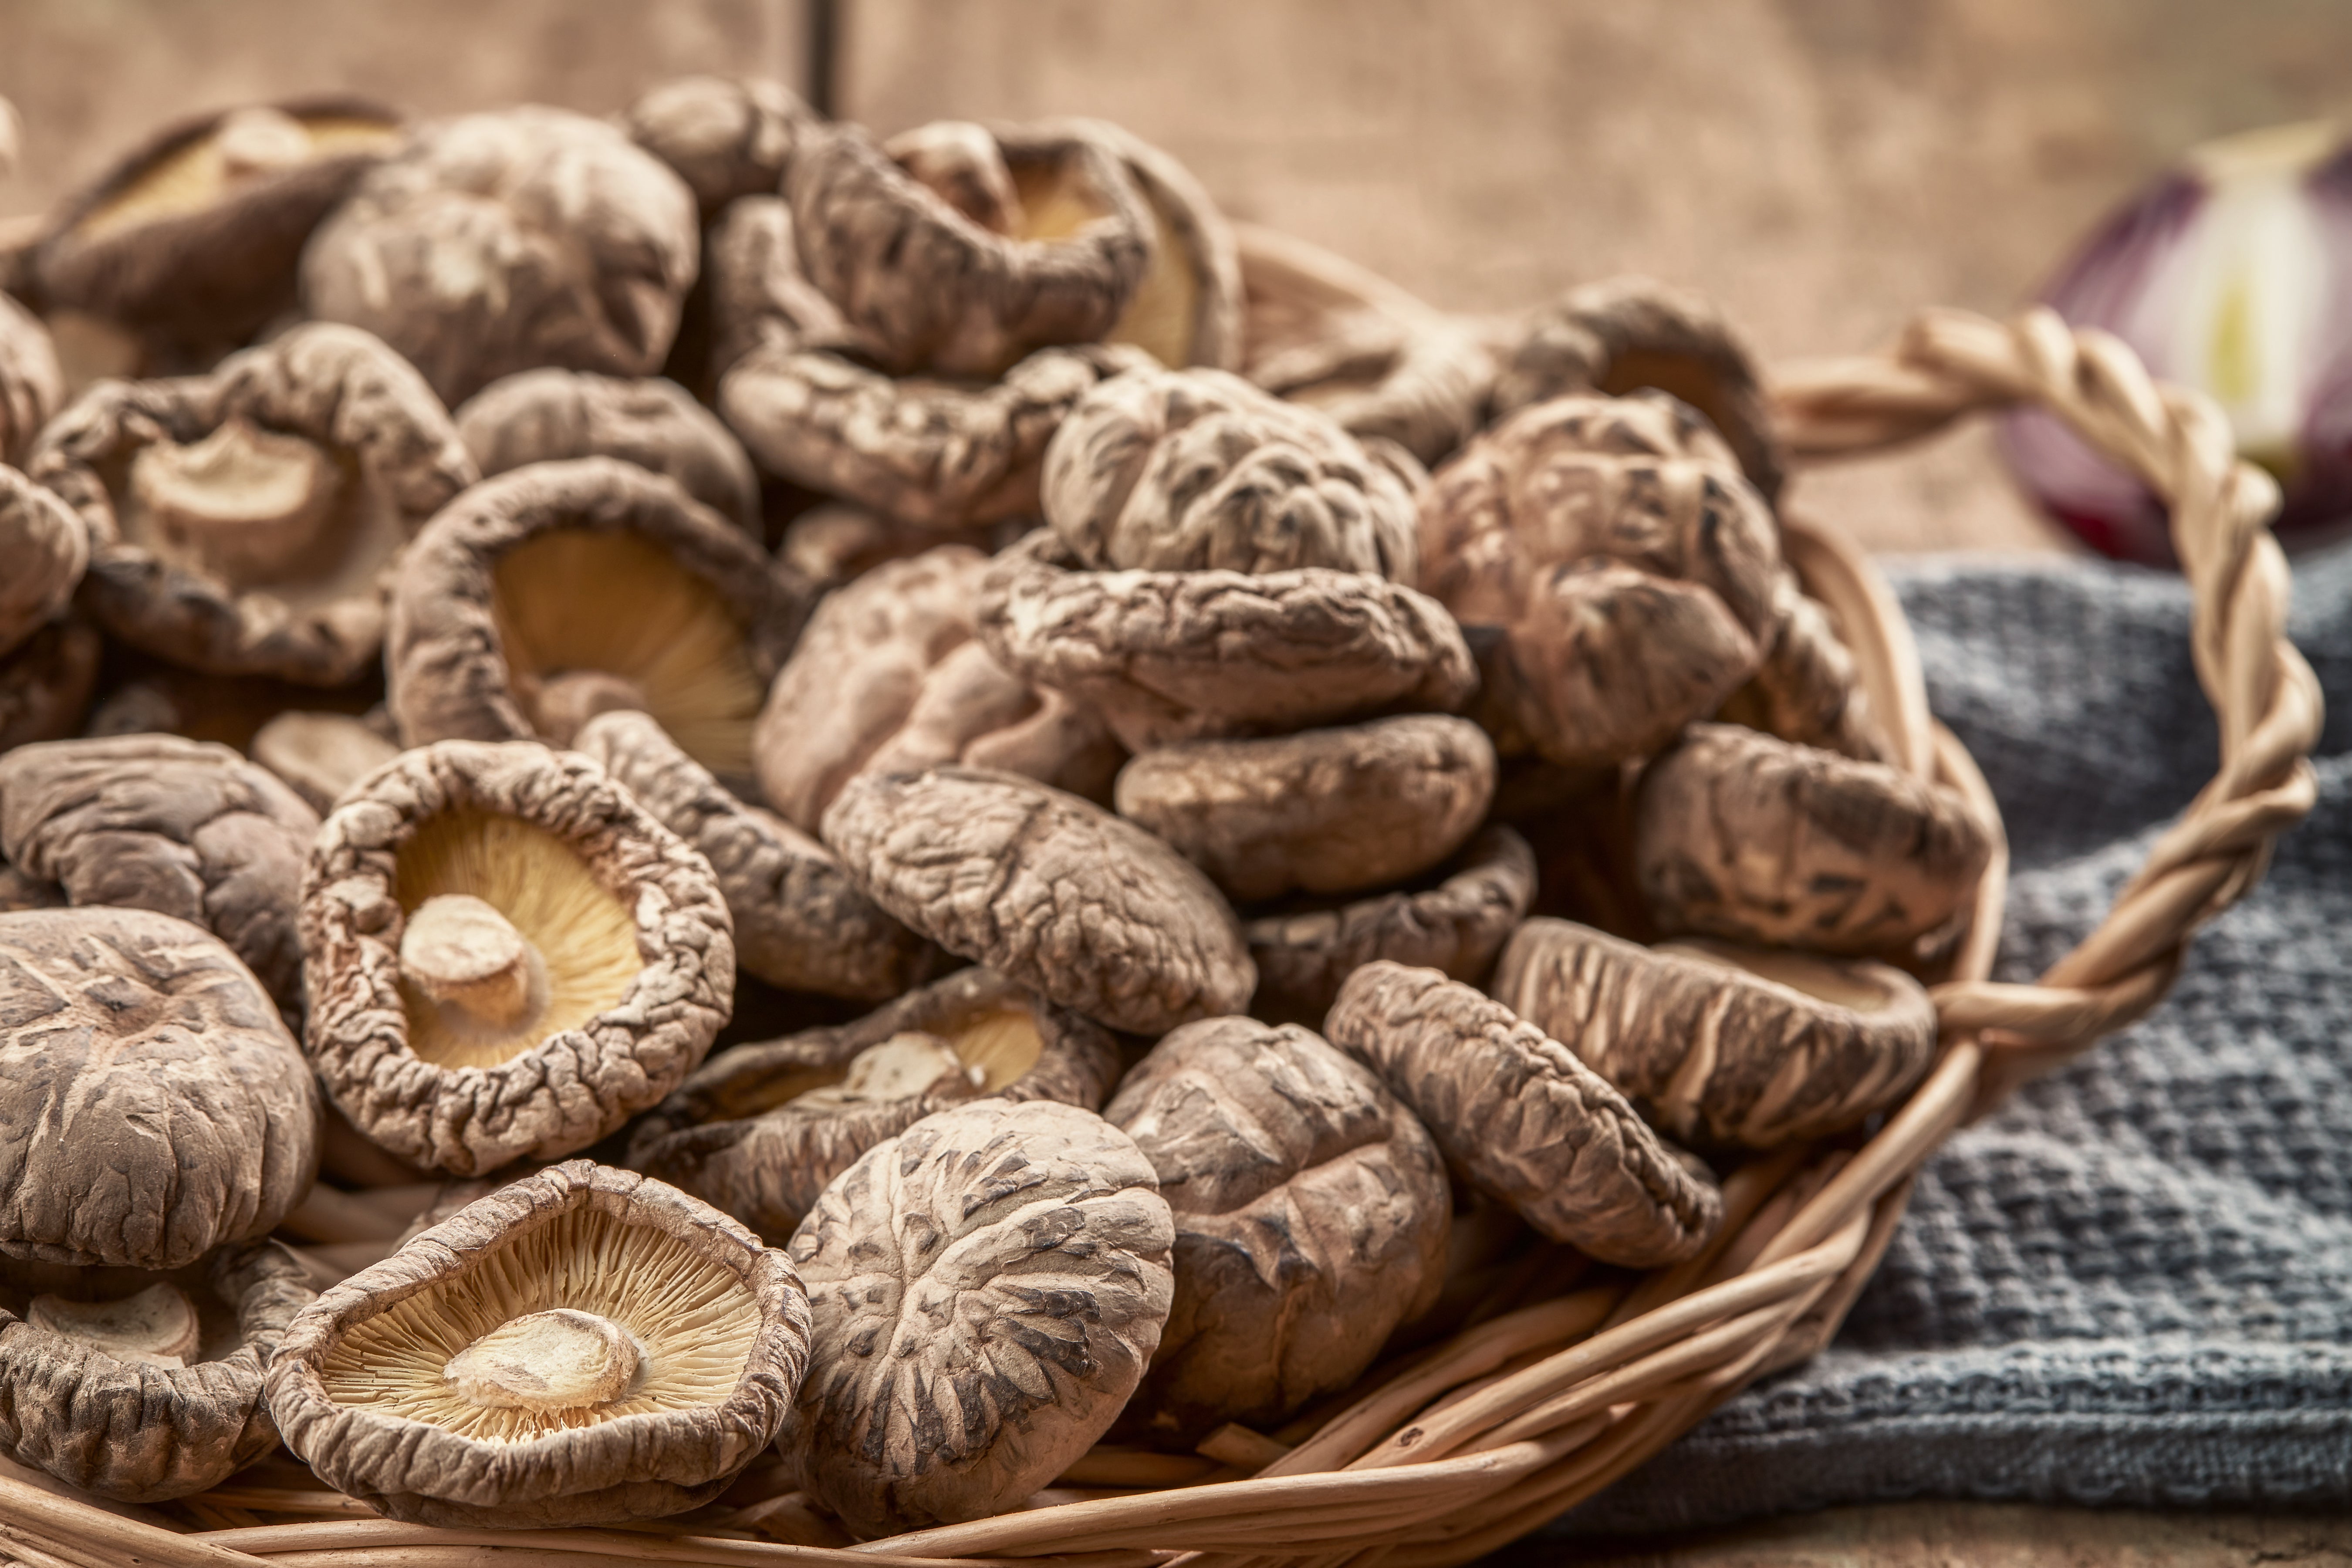 Mushrooms contain a variety of polysaccharides, including alpha- and beta-glucans.